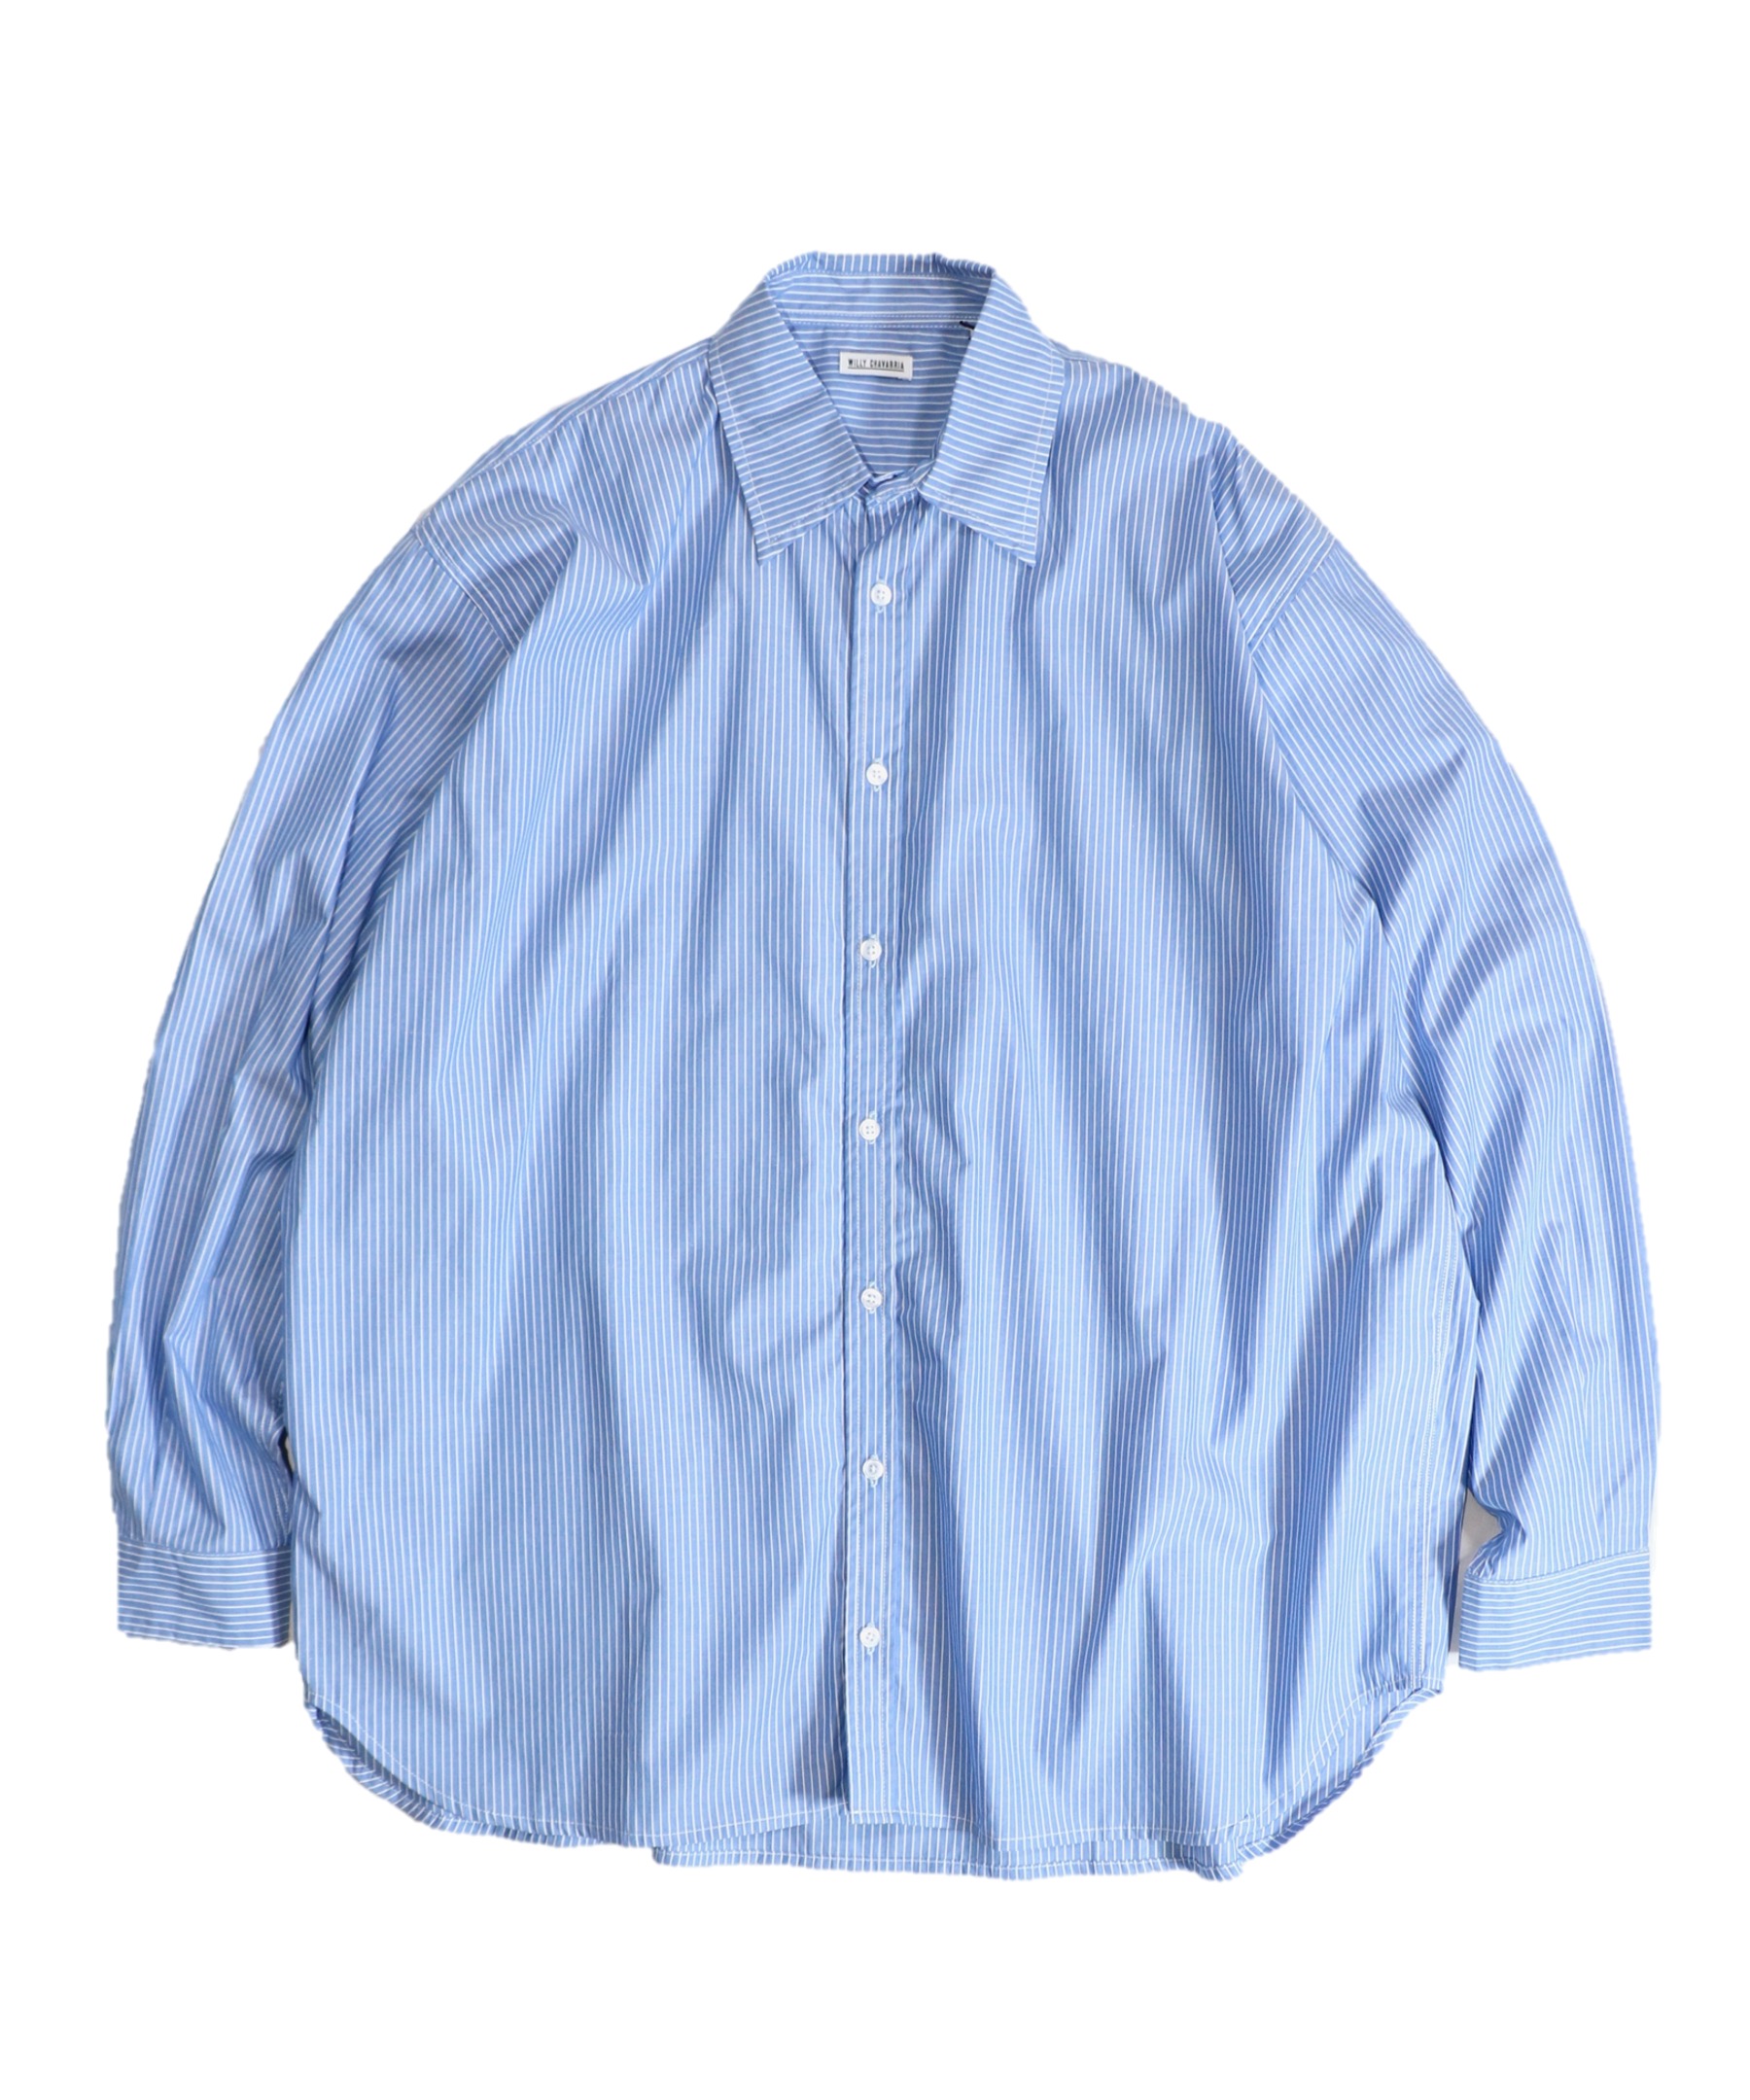 WILLY CHAVARRIA / BIG WILLY DRESS SHIRTS – C.E.L.STORE NOTE